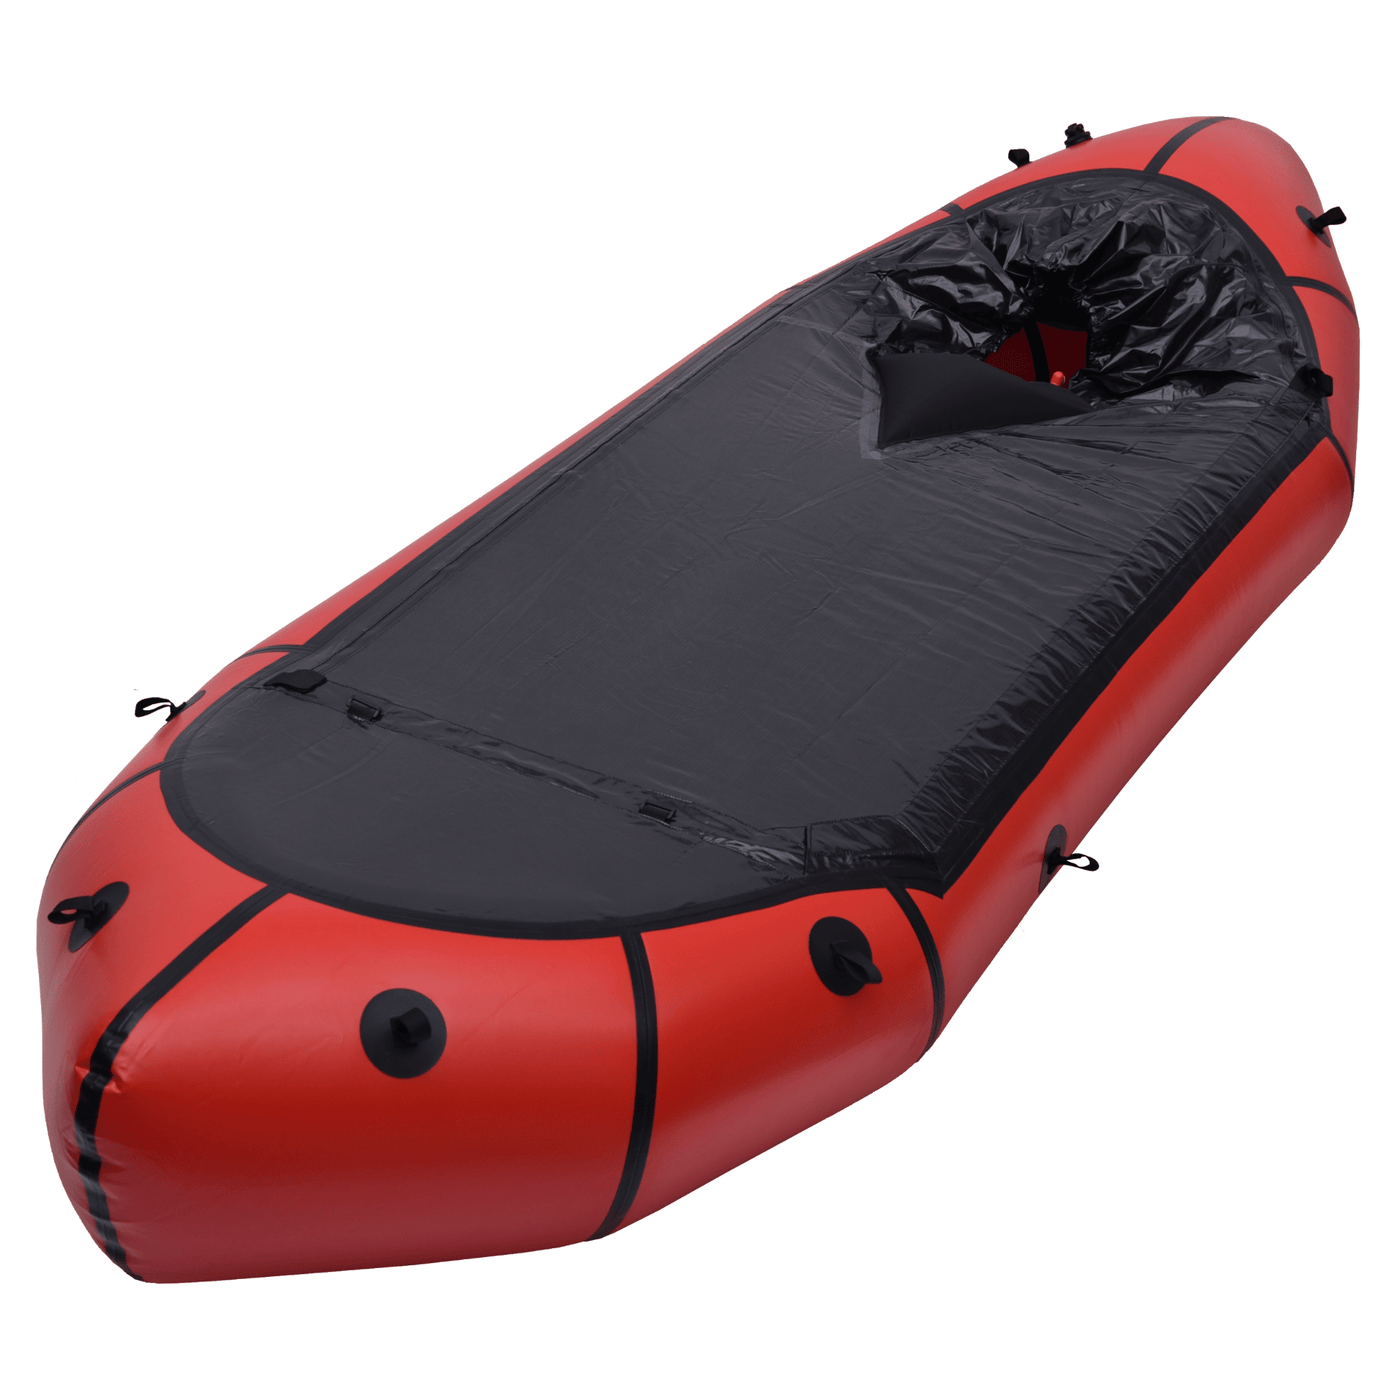 MRS Micro Packraft Extra Long | Packrafts and Kayaks | NZ #red